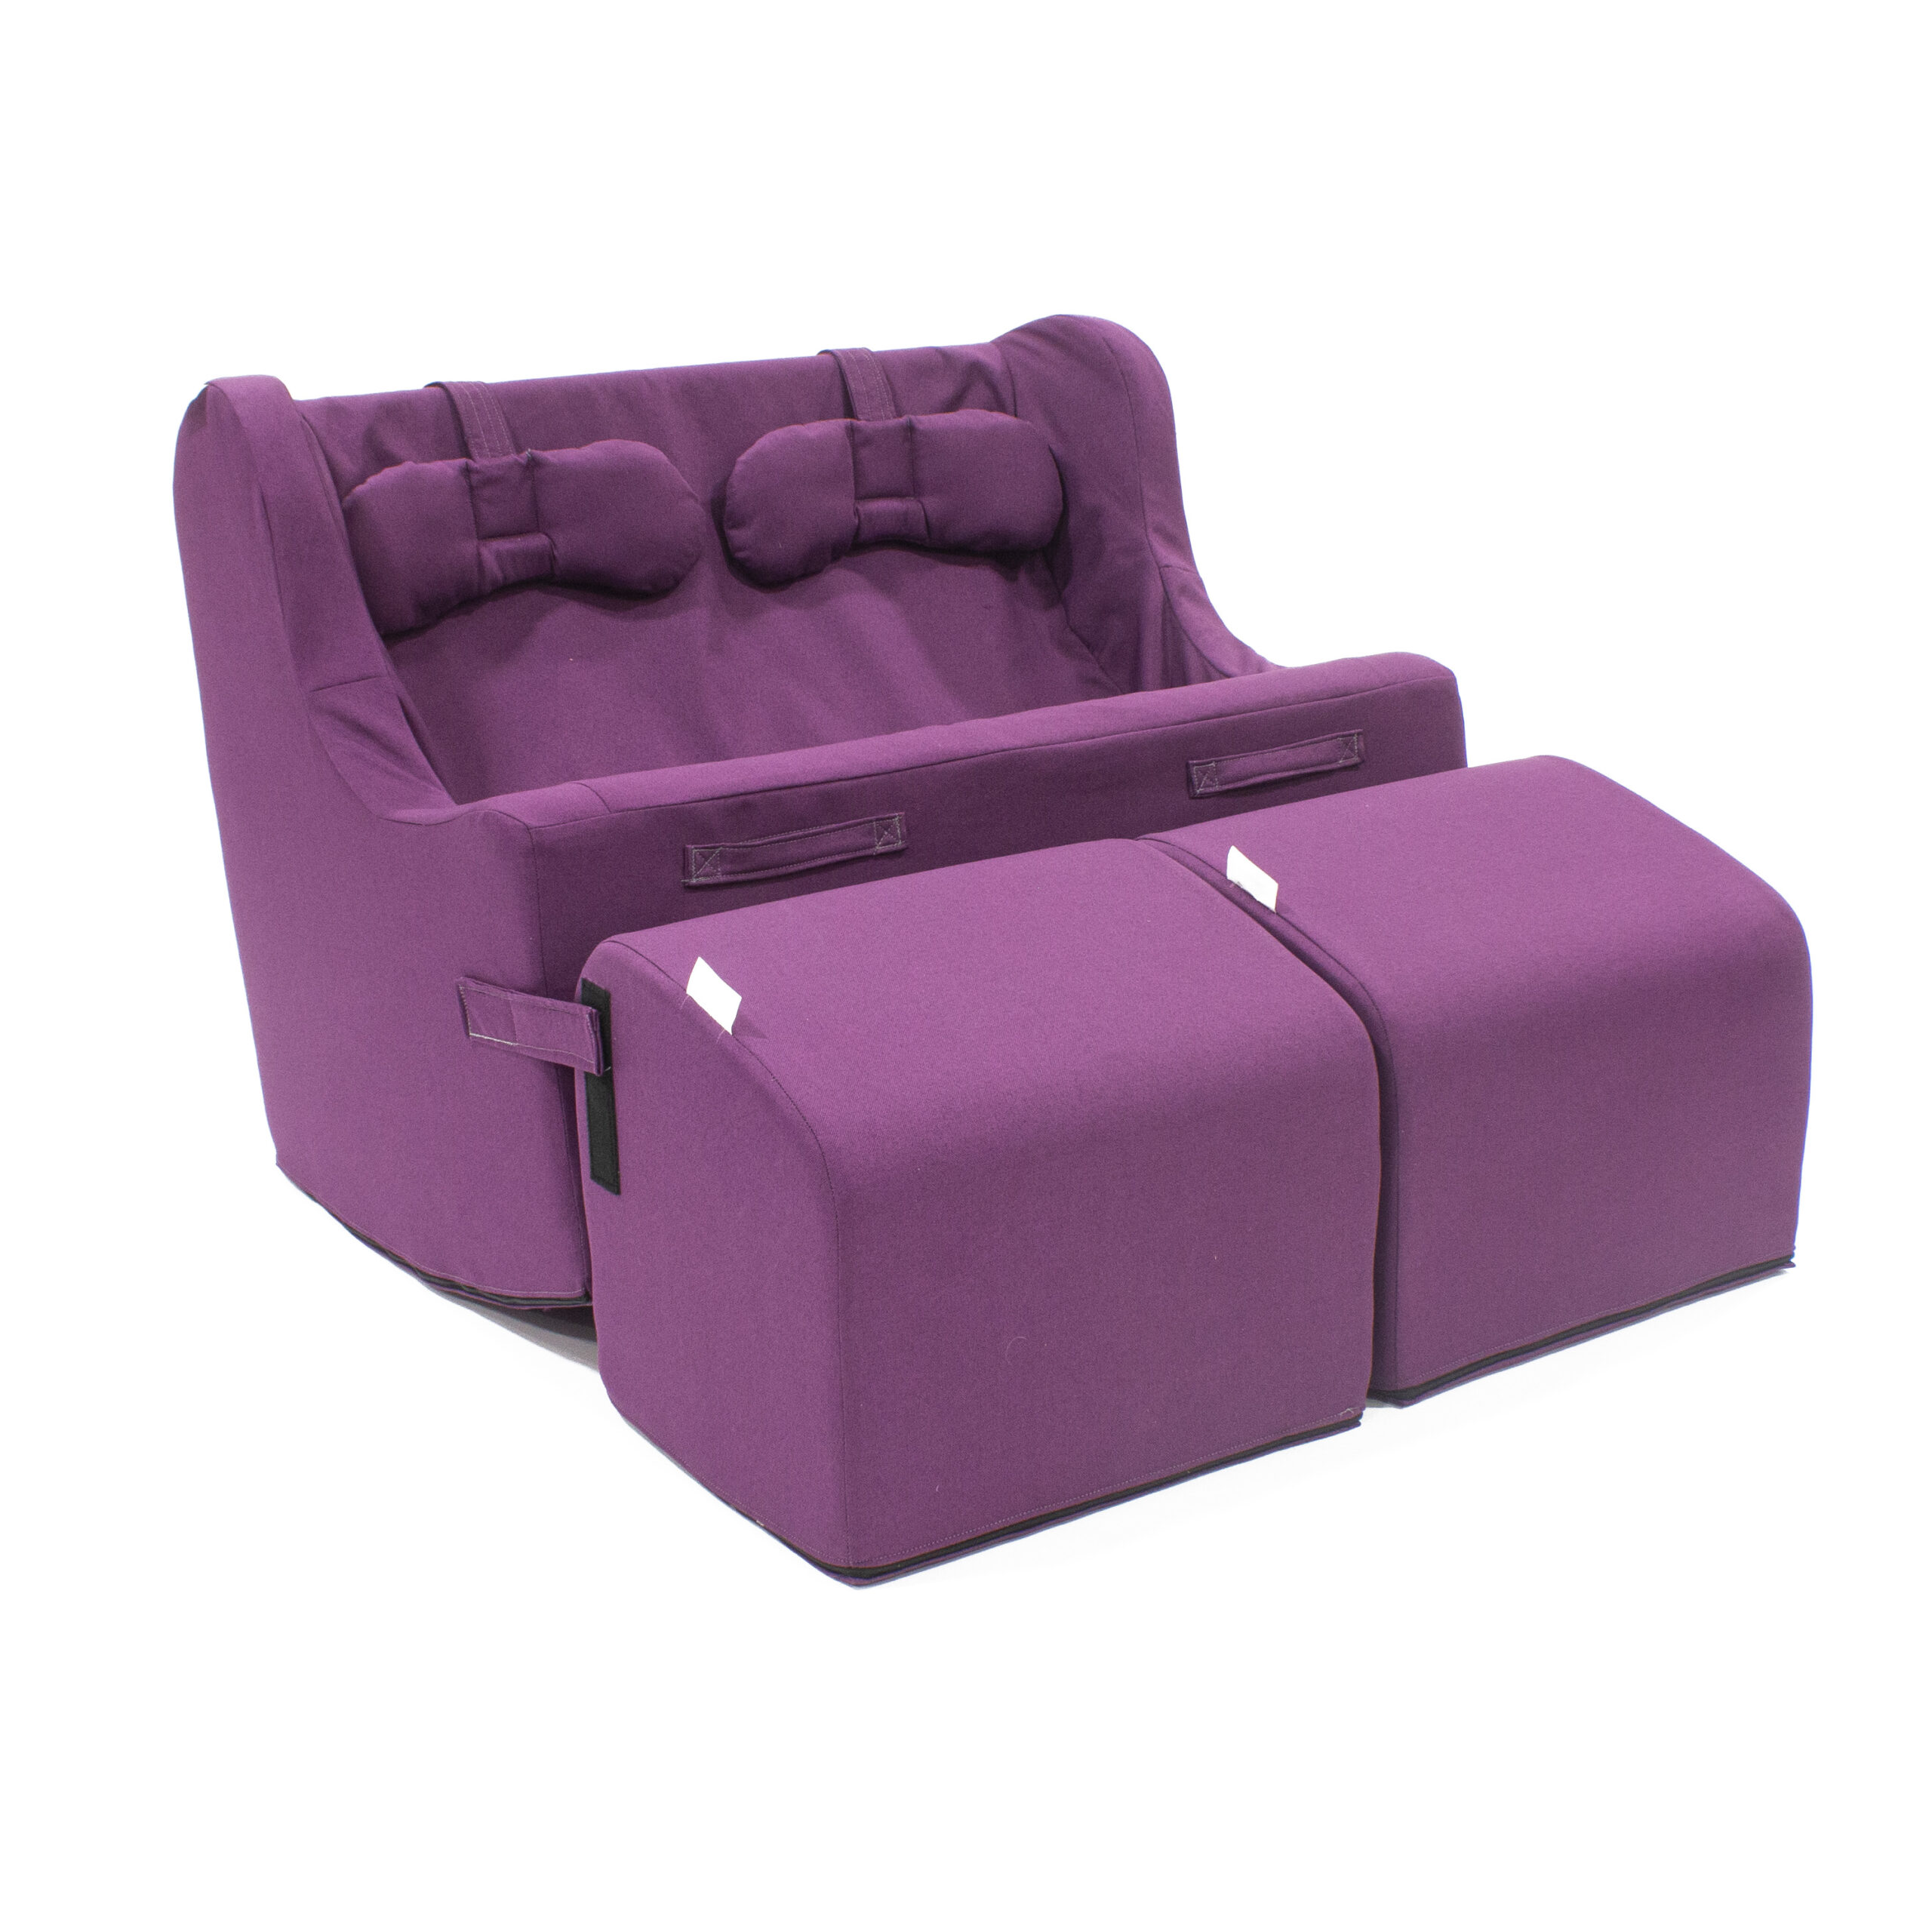 Custom Chill-Out Chair alternative seating